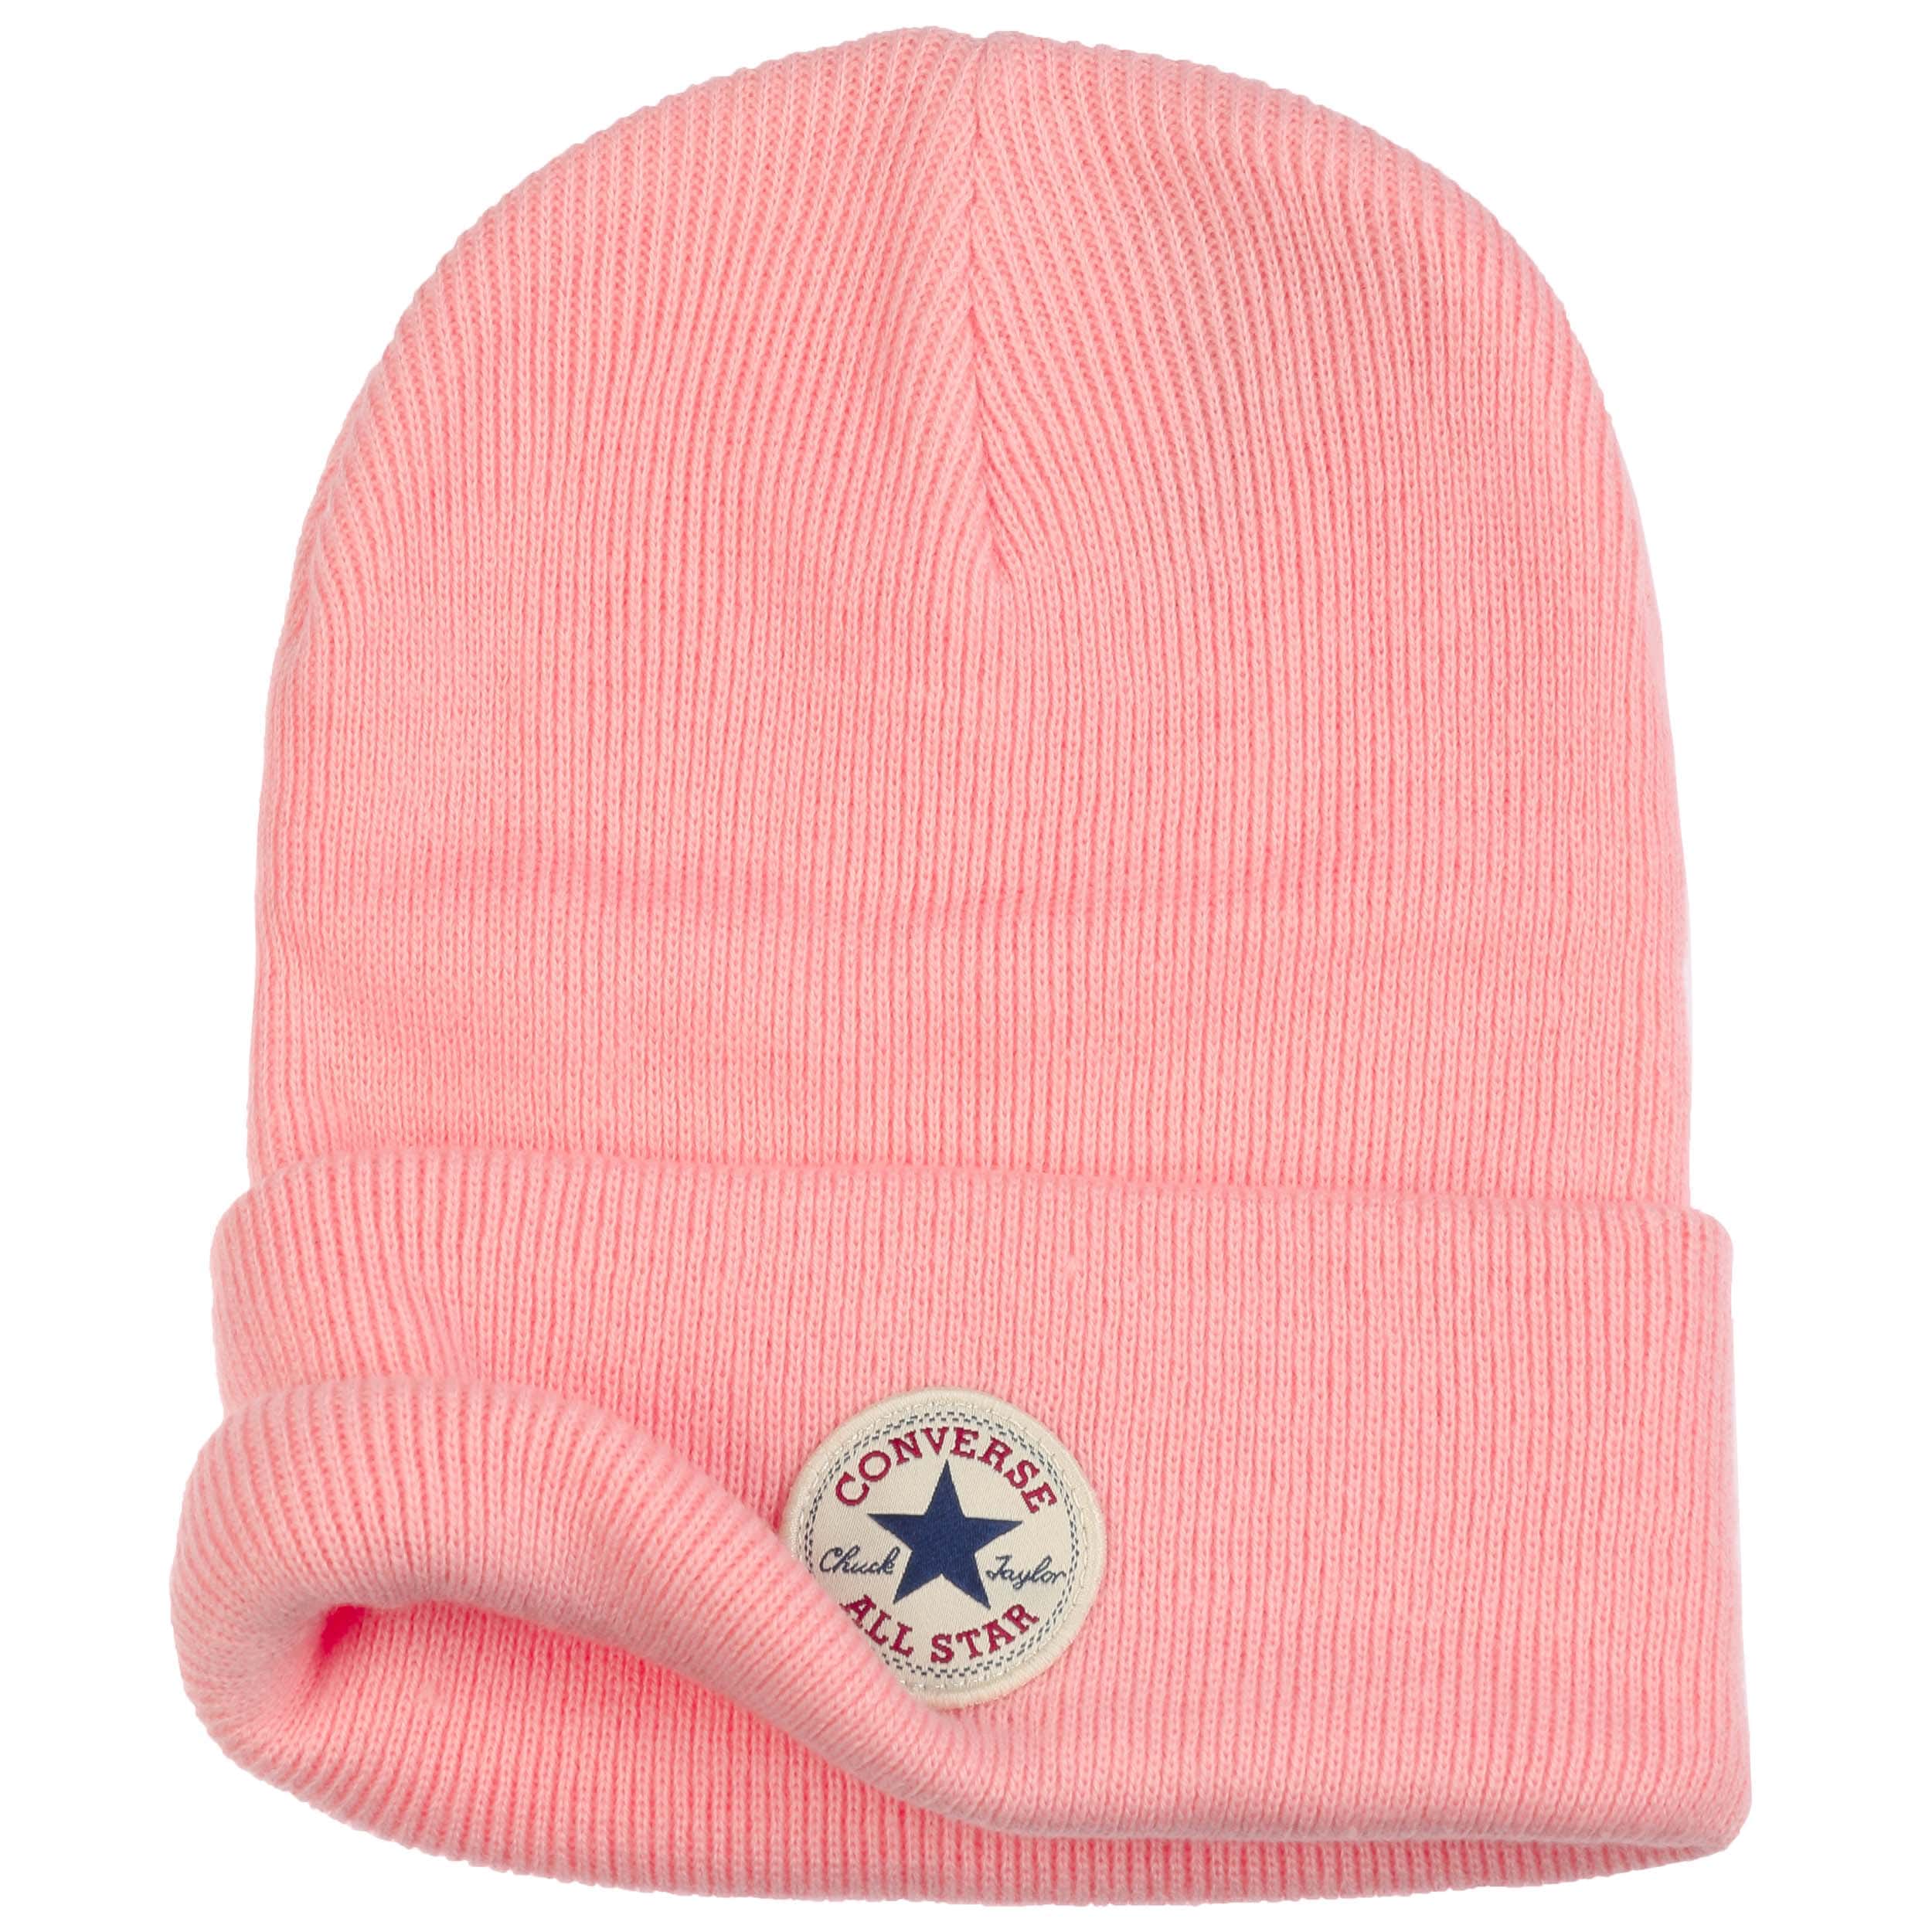 Cuff with Star All - 21,95 Beanie € by Converse